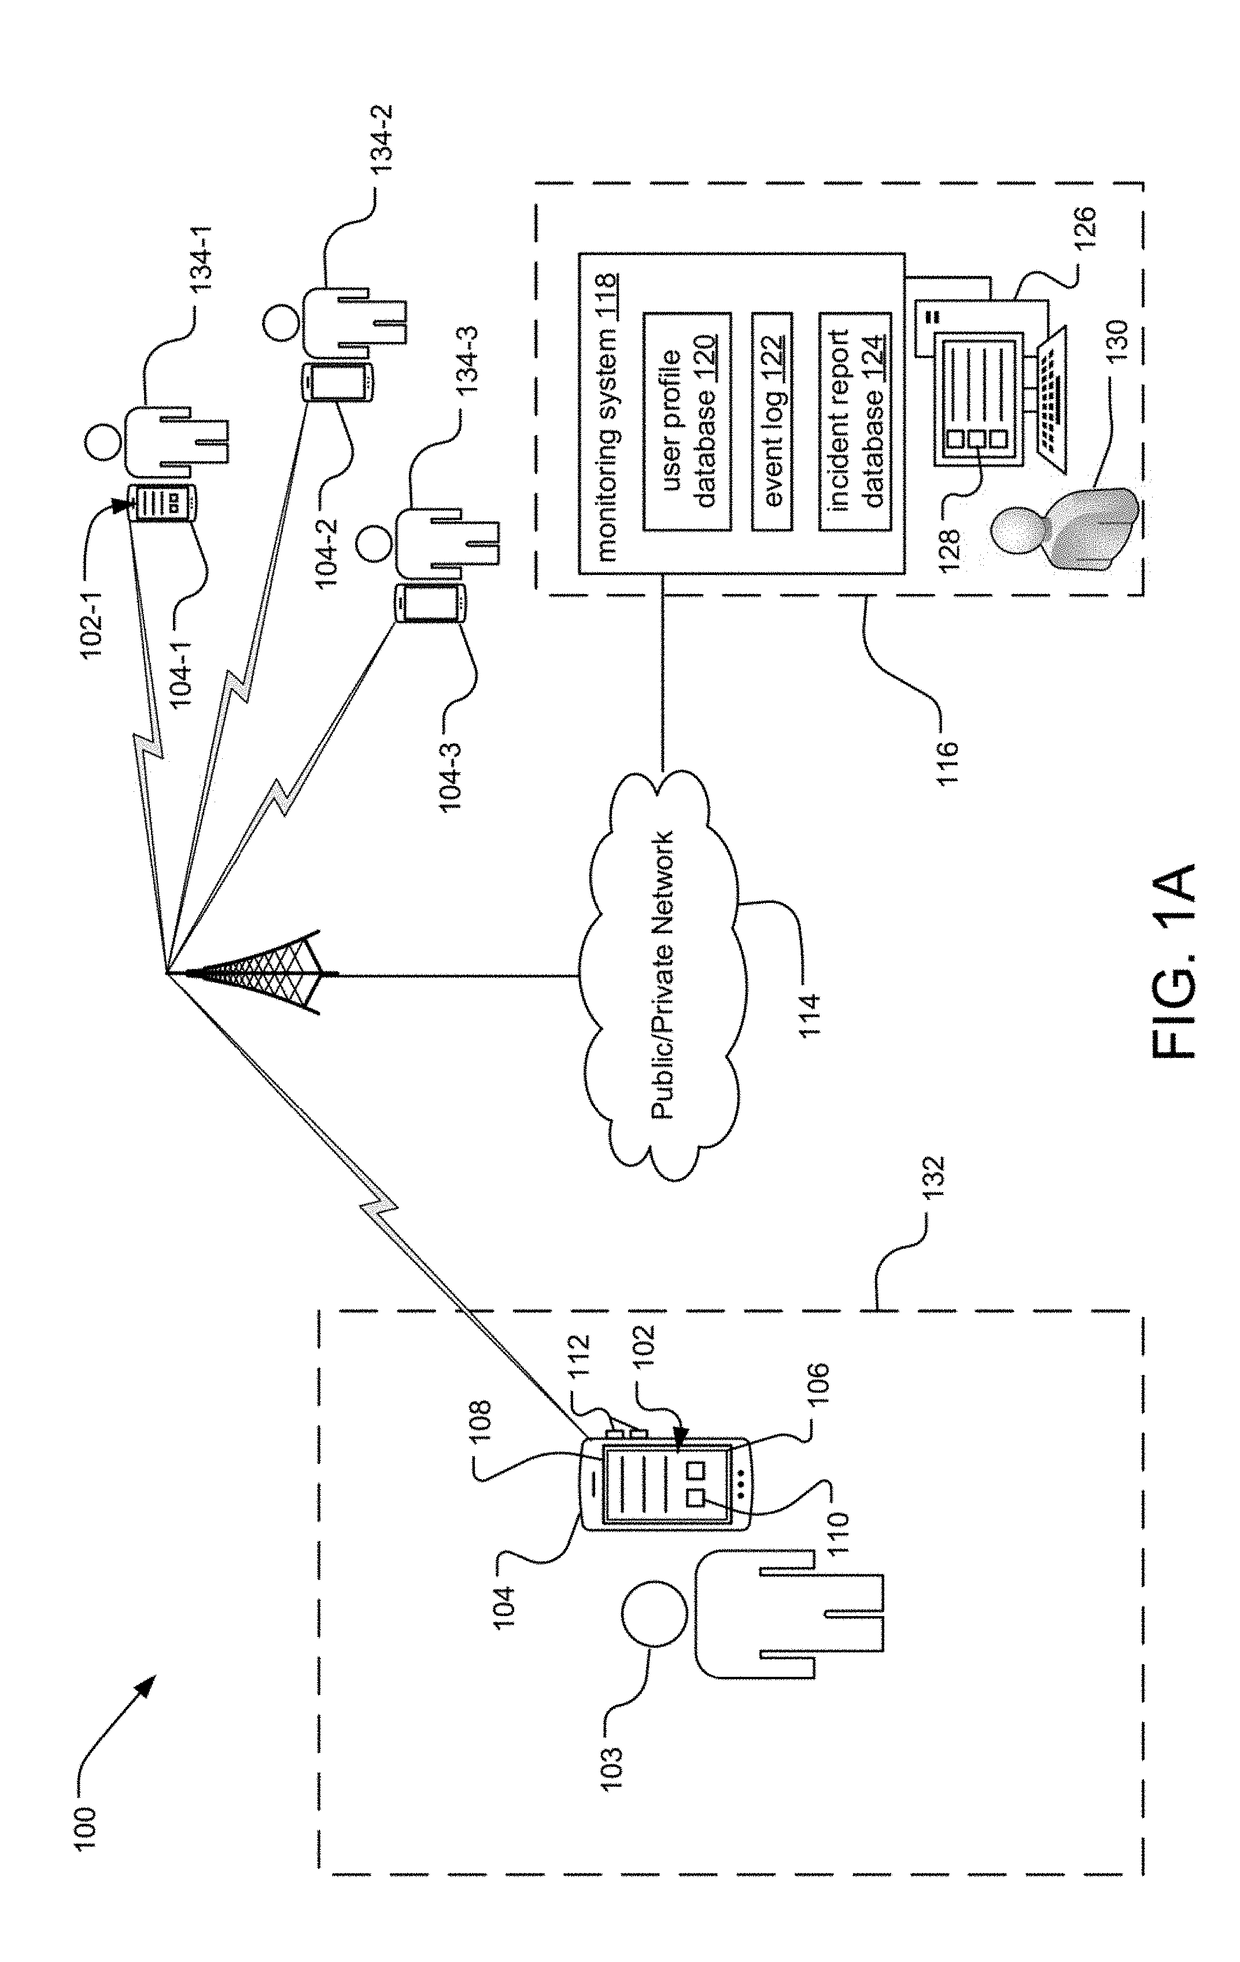 Method and system for mobile duress alarm